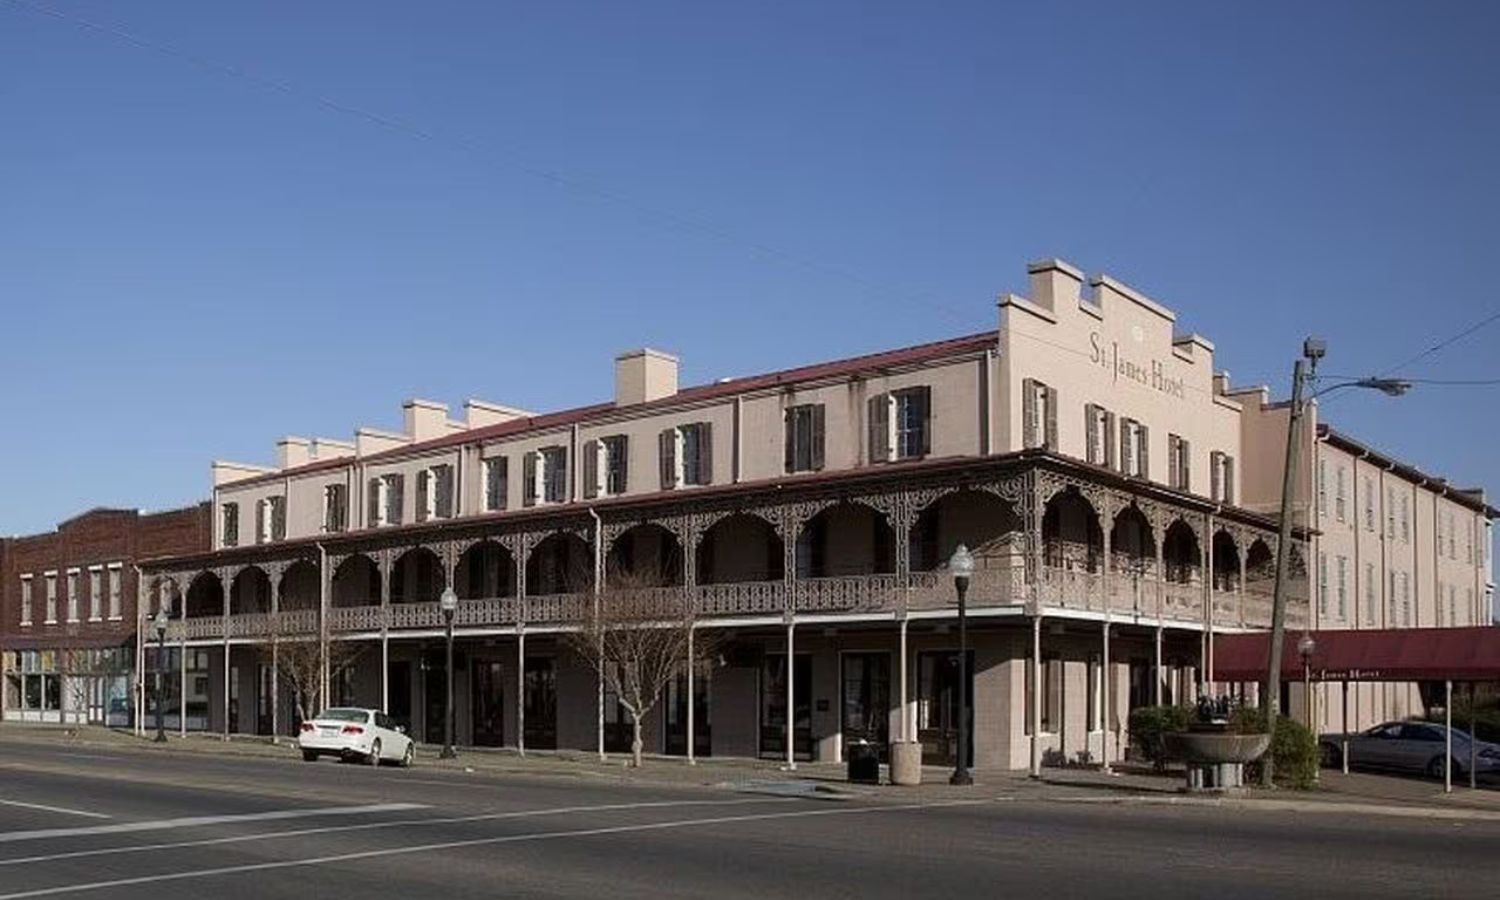 The Story Behind This Haunted Hotel in Alabama